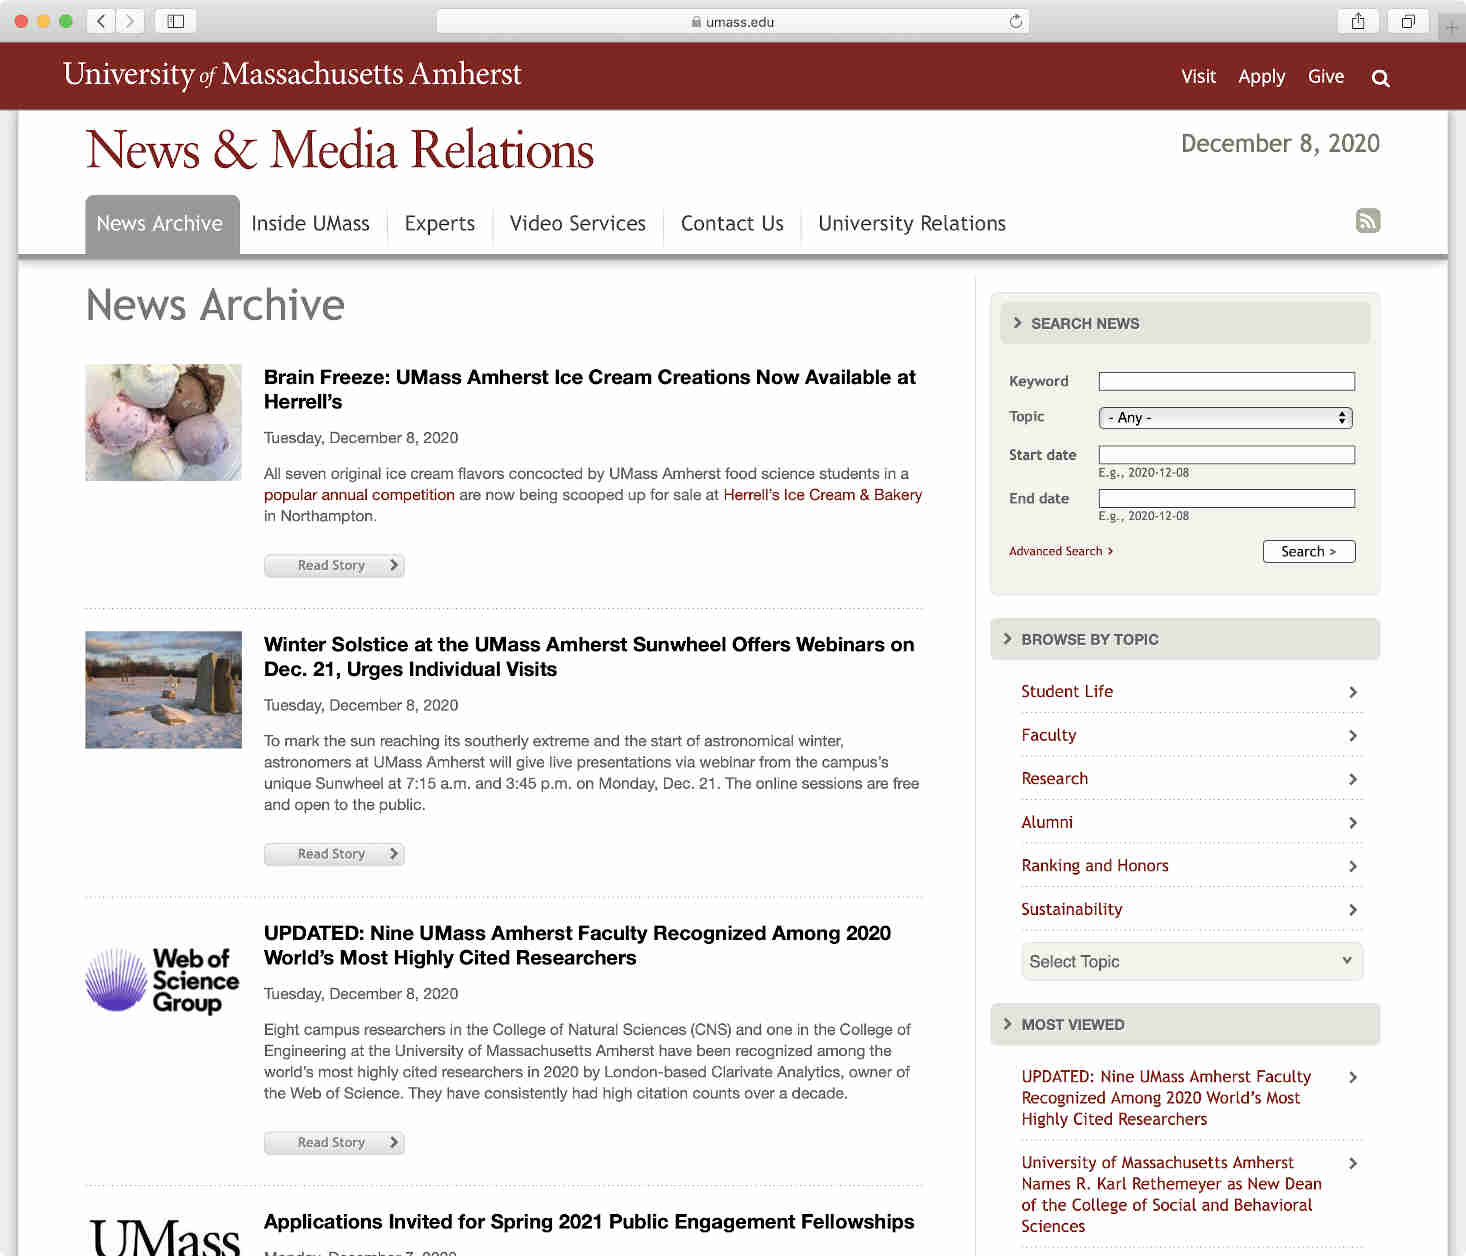 UMass News Archive search page